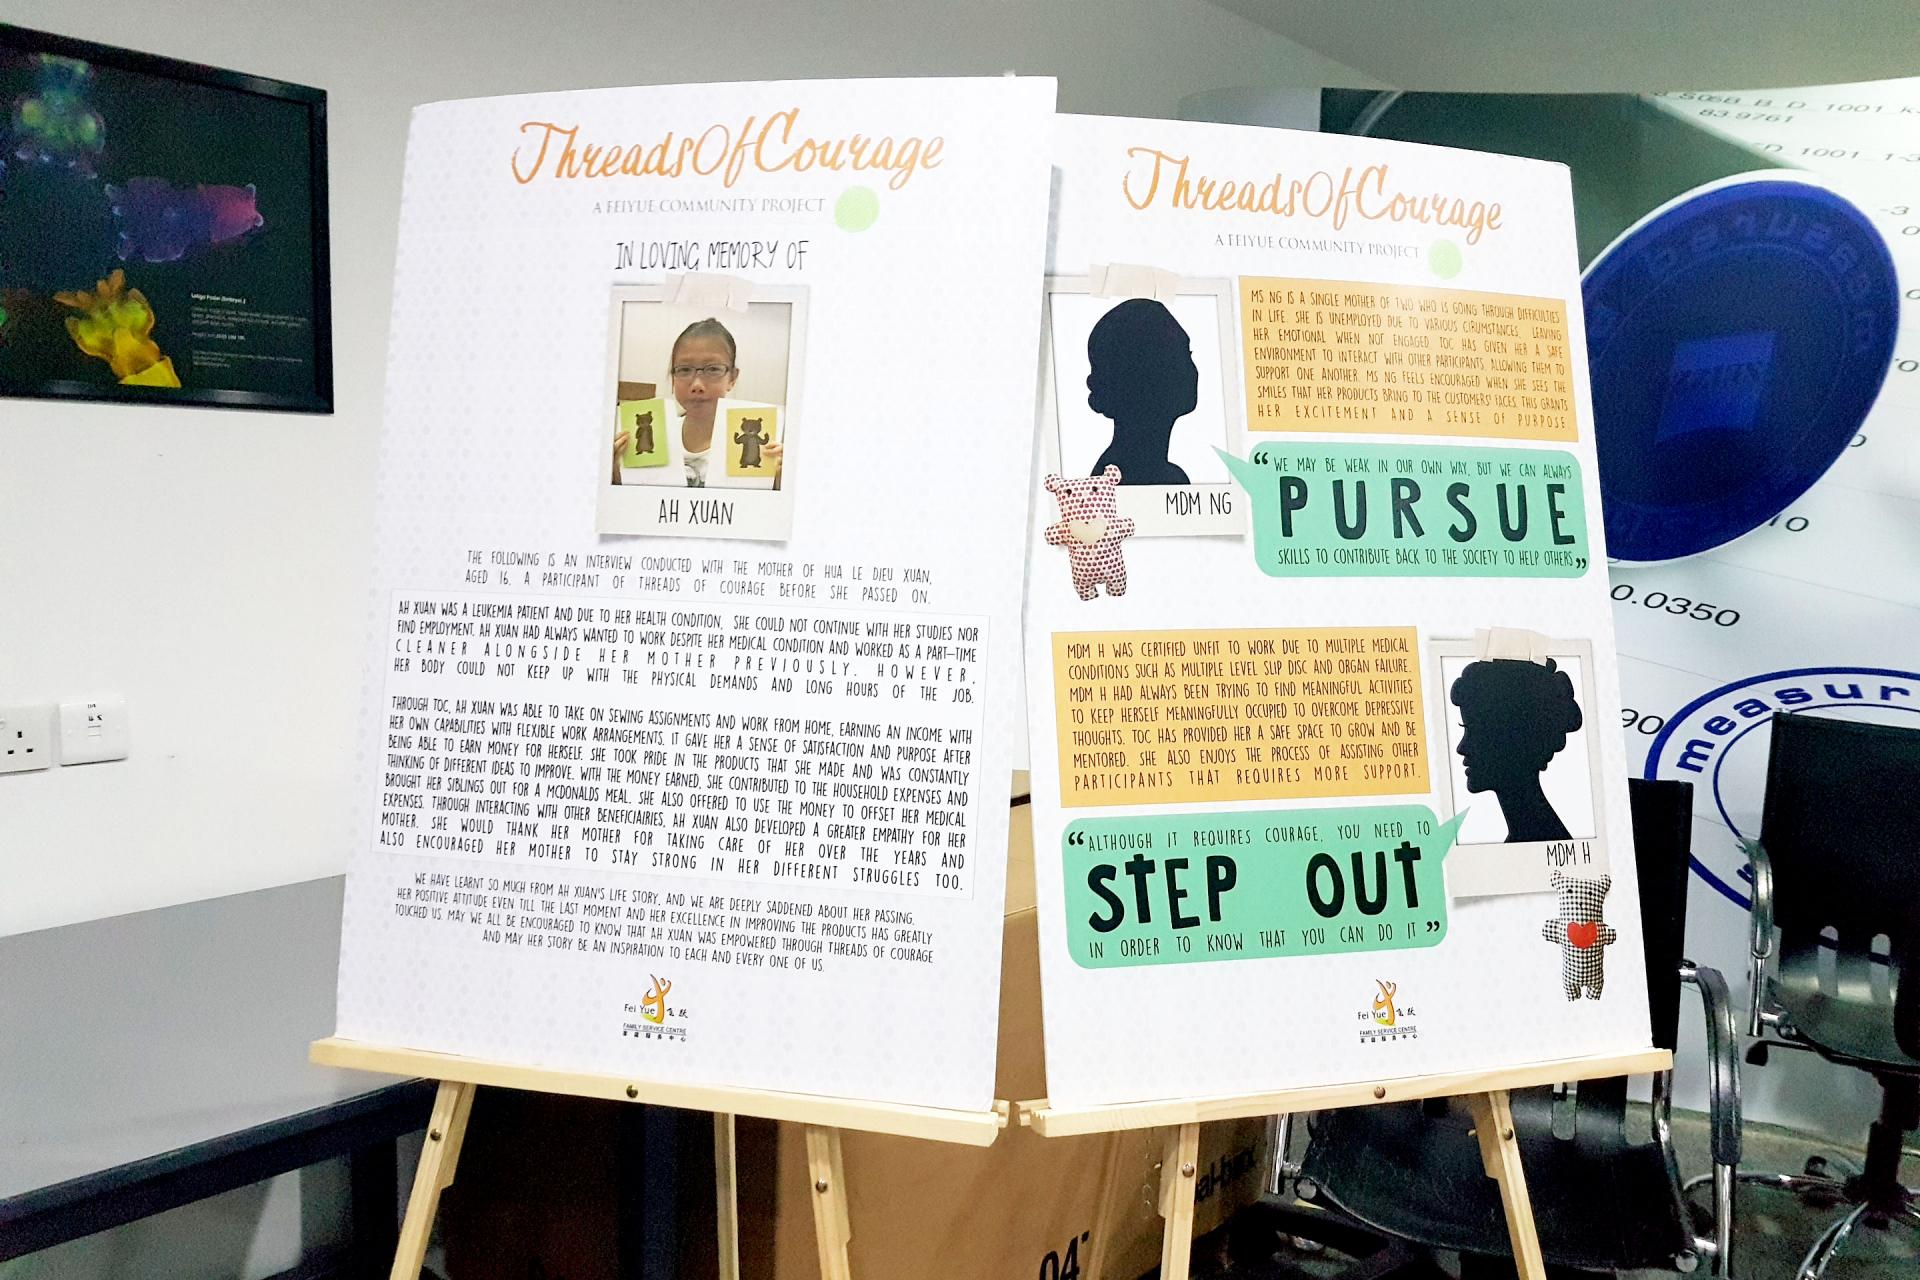 Two posters of threads of courrage project on an easel.